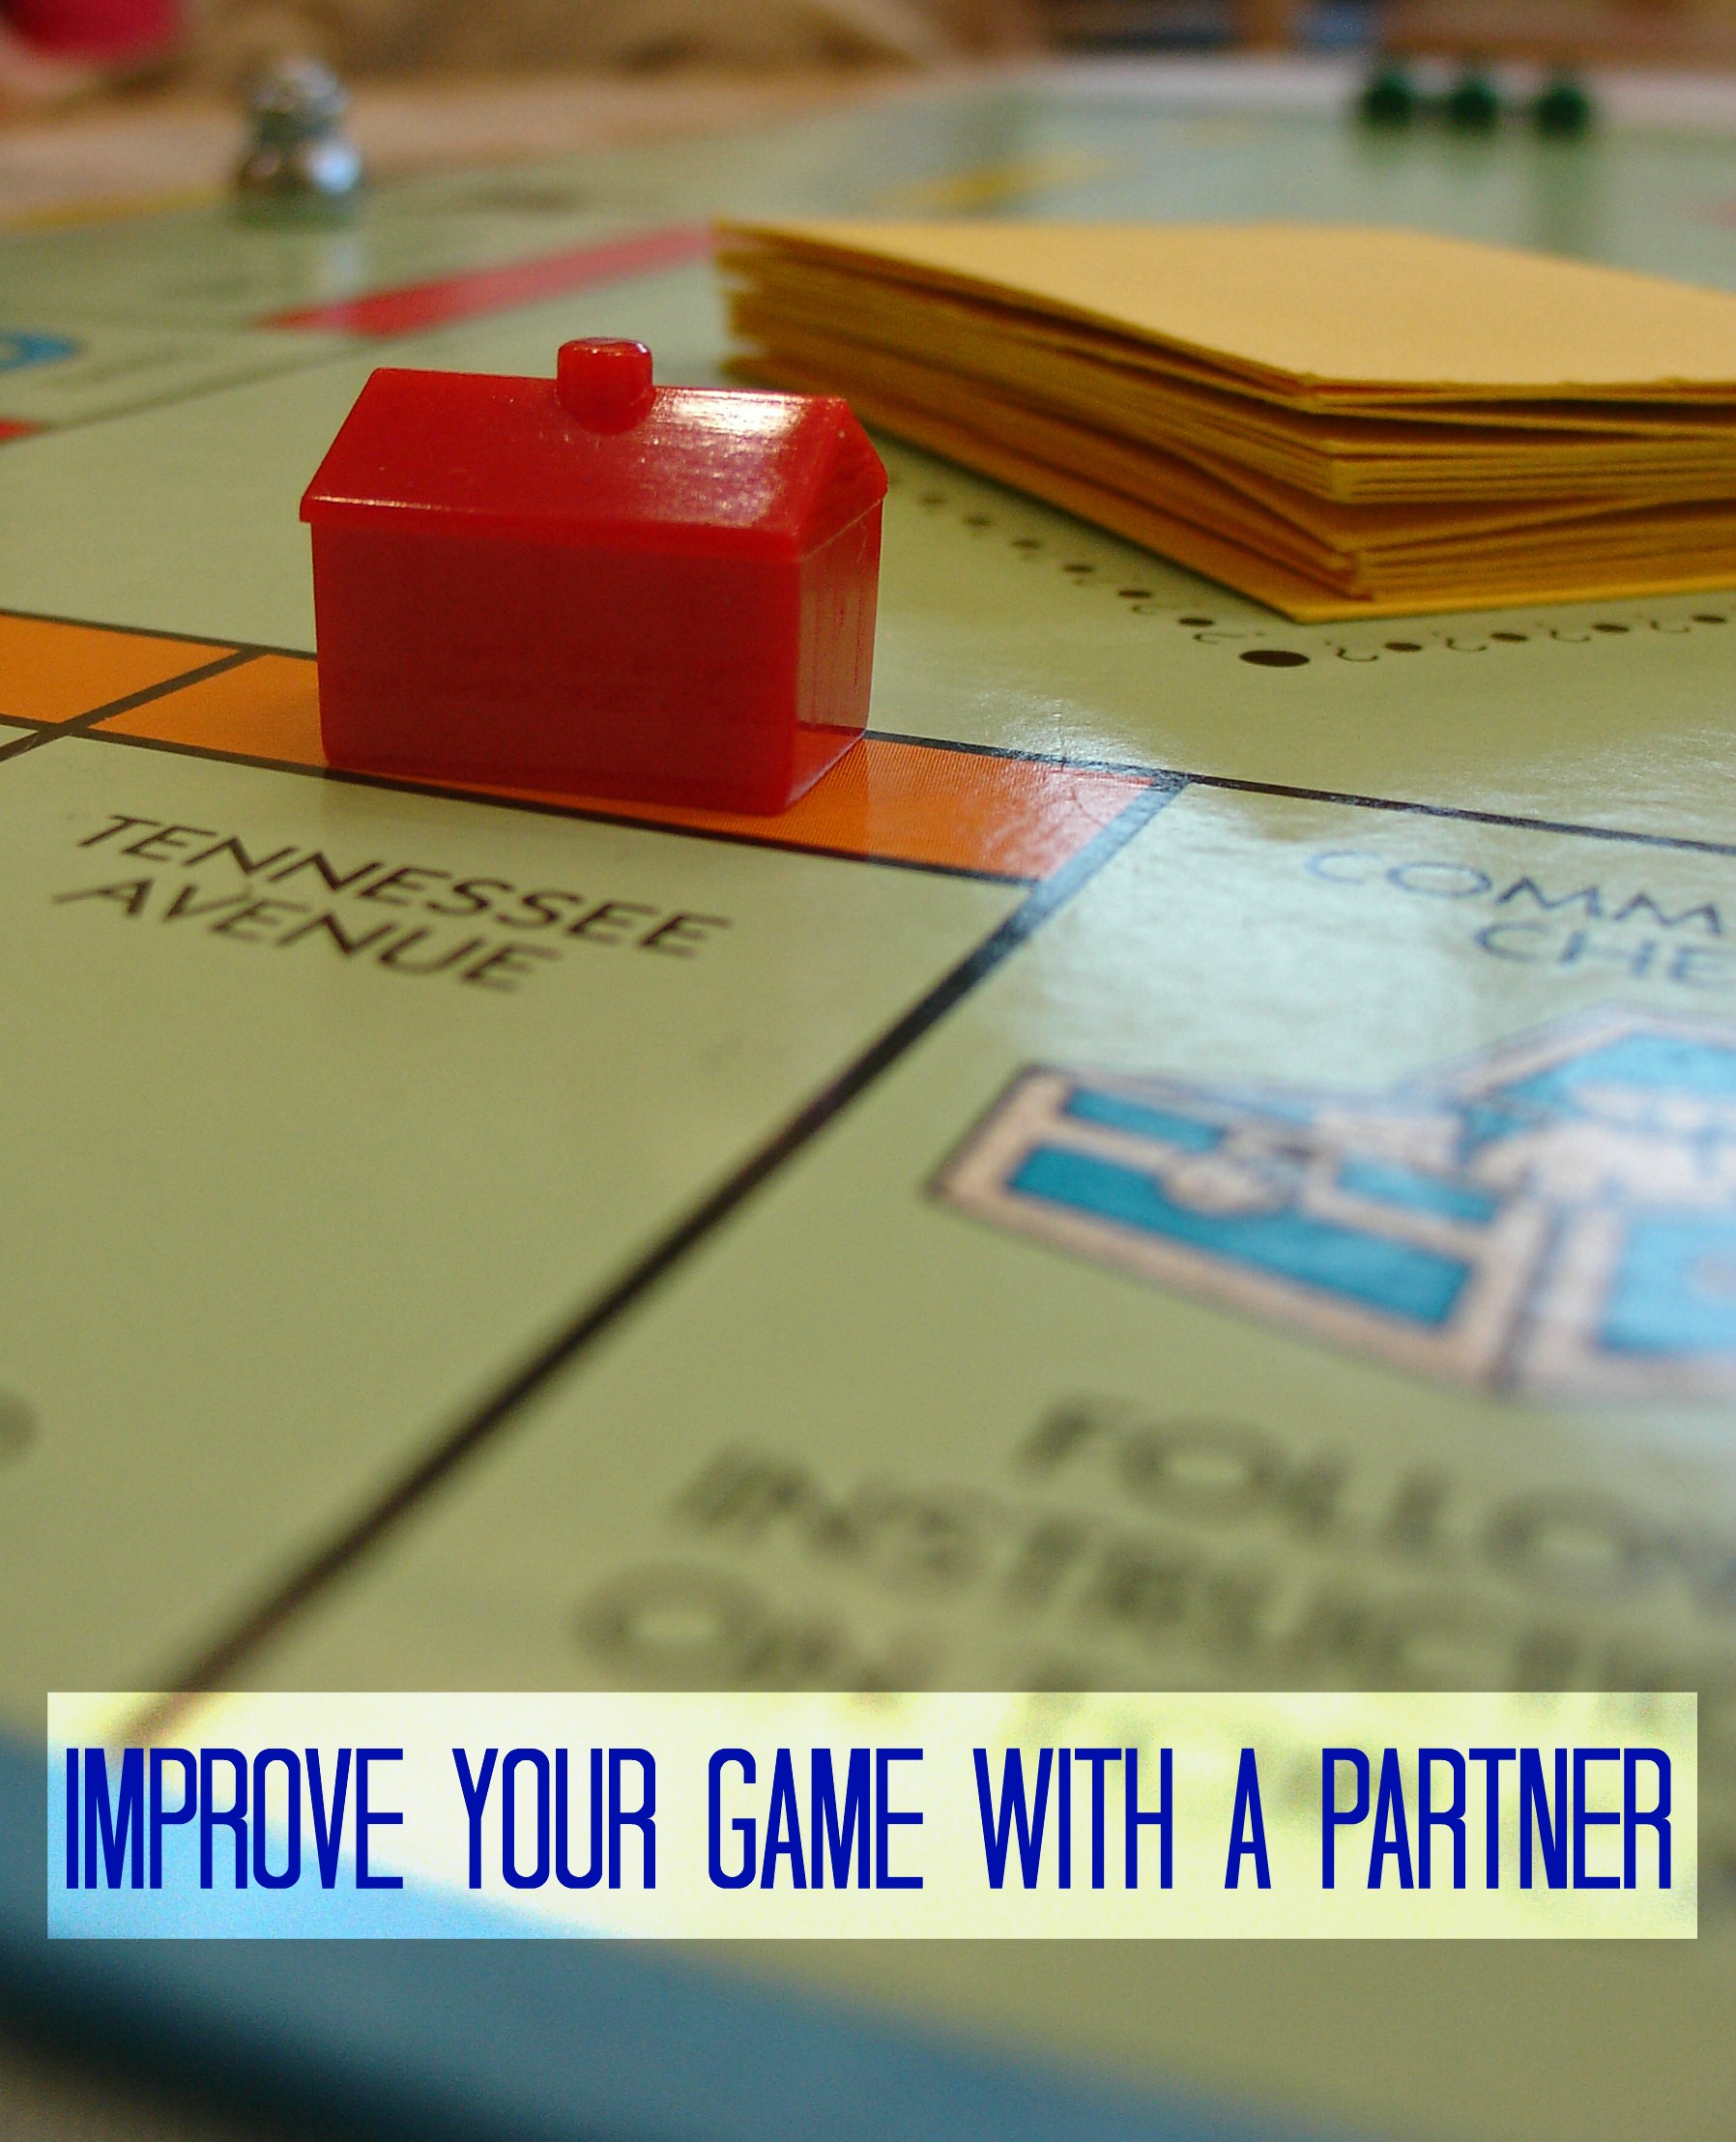 Monopoly Board with Improve Your Game with a partner